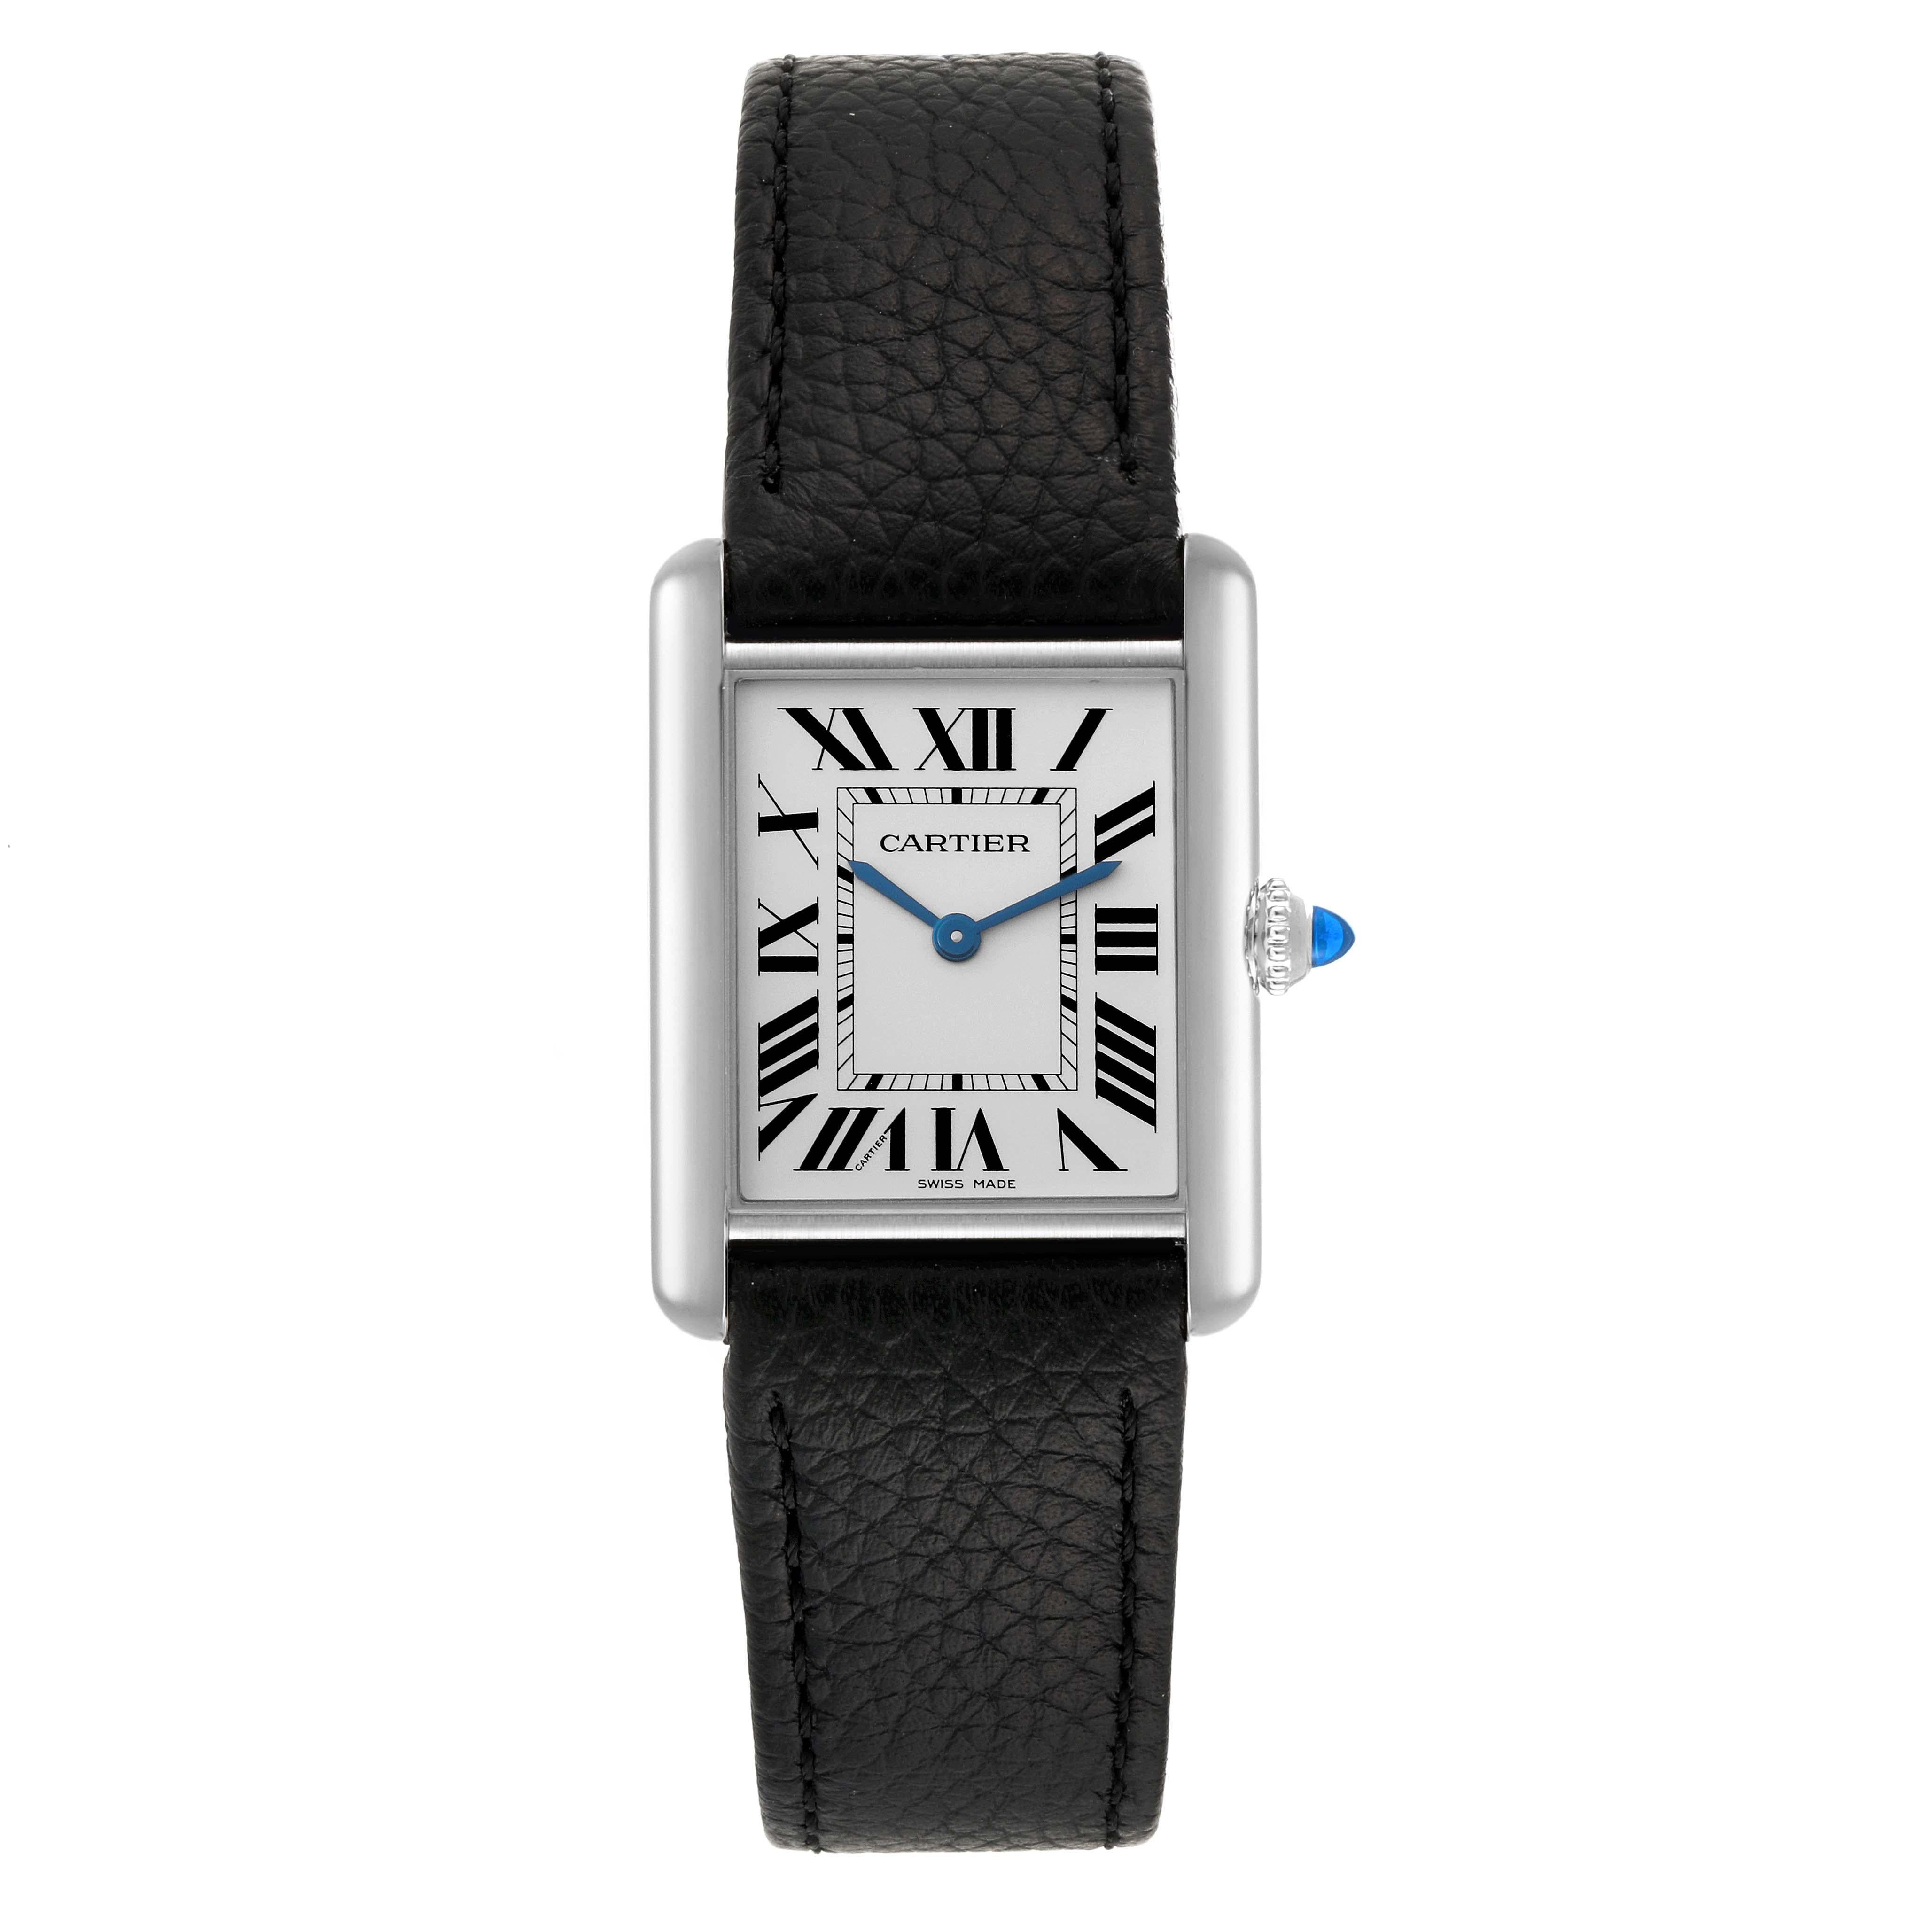 Cartier Tank Must Large Steel Silver Dial Ladies Watch WSTA0041 Unworn. Quartz movement. Stainless steel case 33.7 x 25.5 mm. Circular grained crown set with the blue spinel cabochon. . Scratch resistant sapphire crystal. Silver dial with black